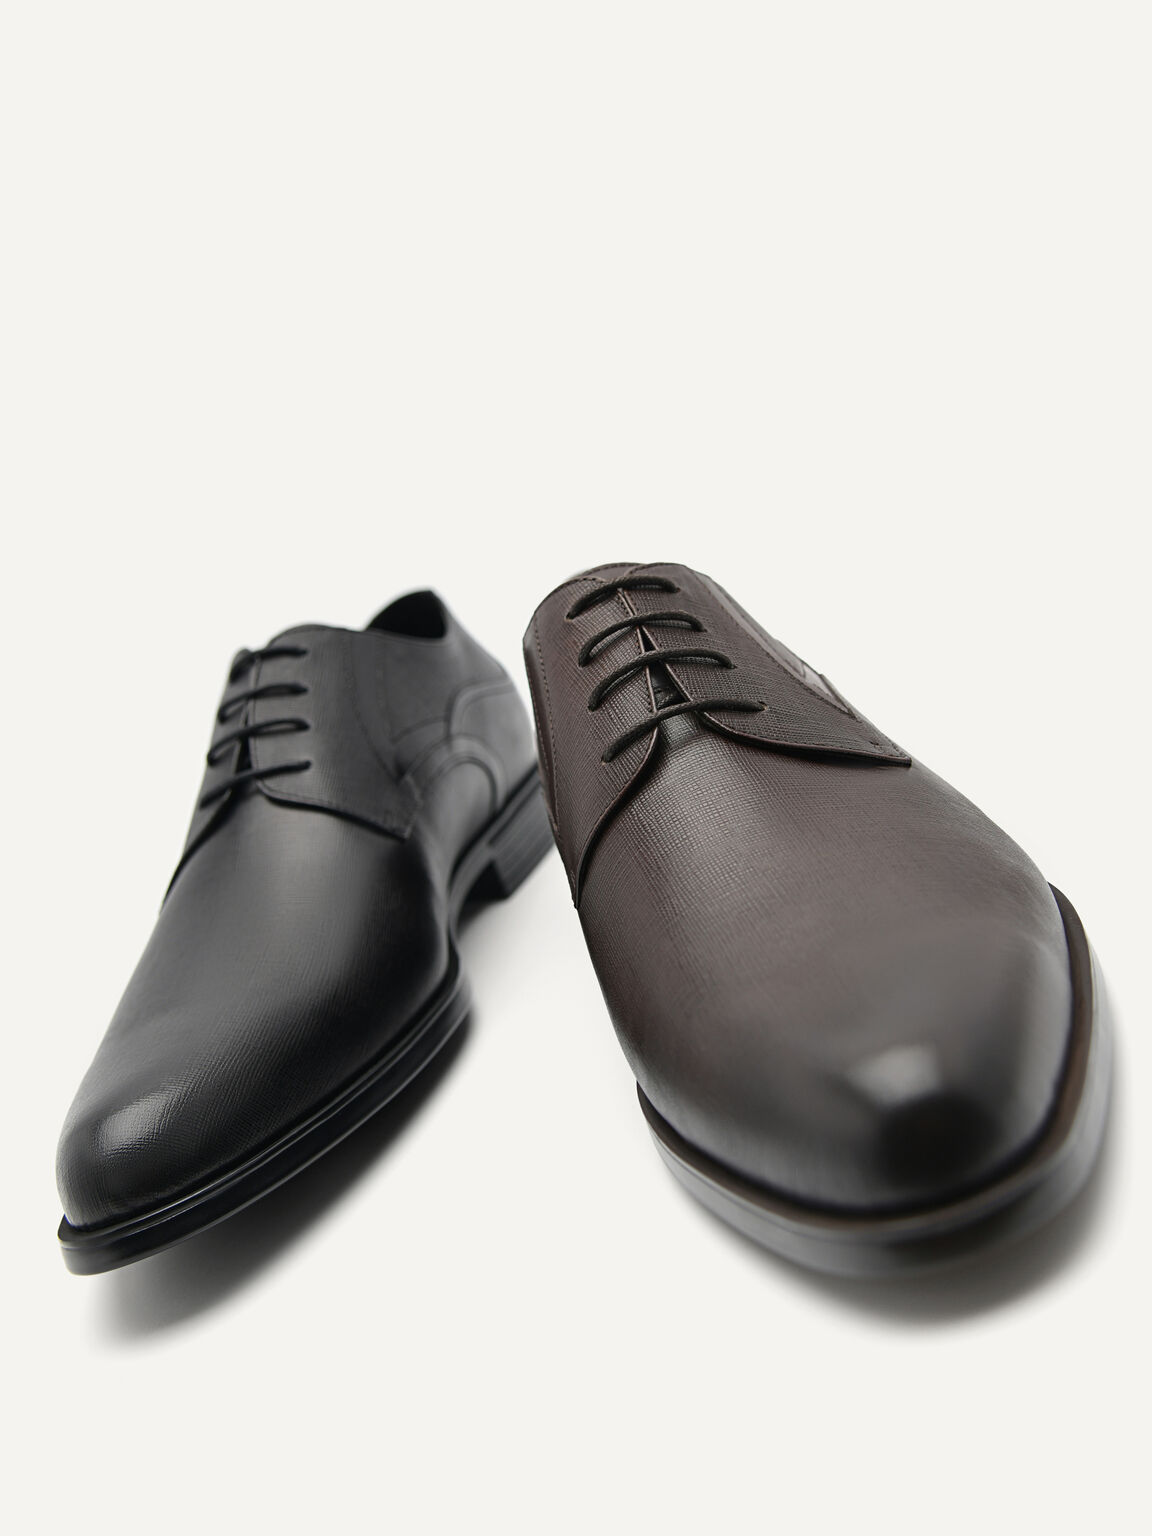 Ford Leather Derby Shoes, Black